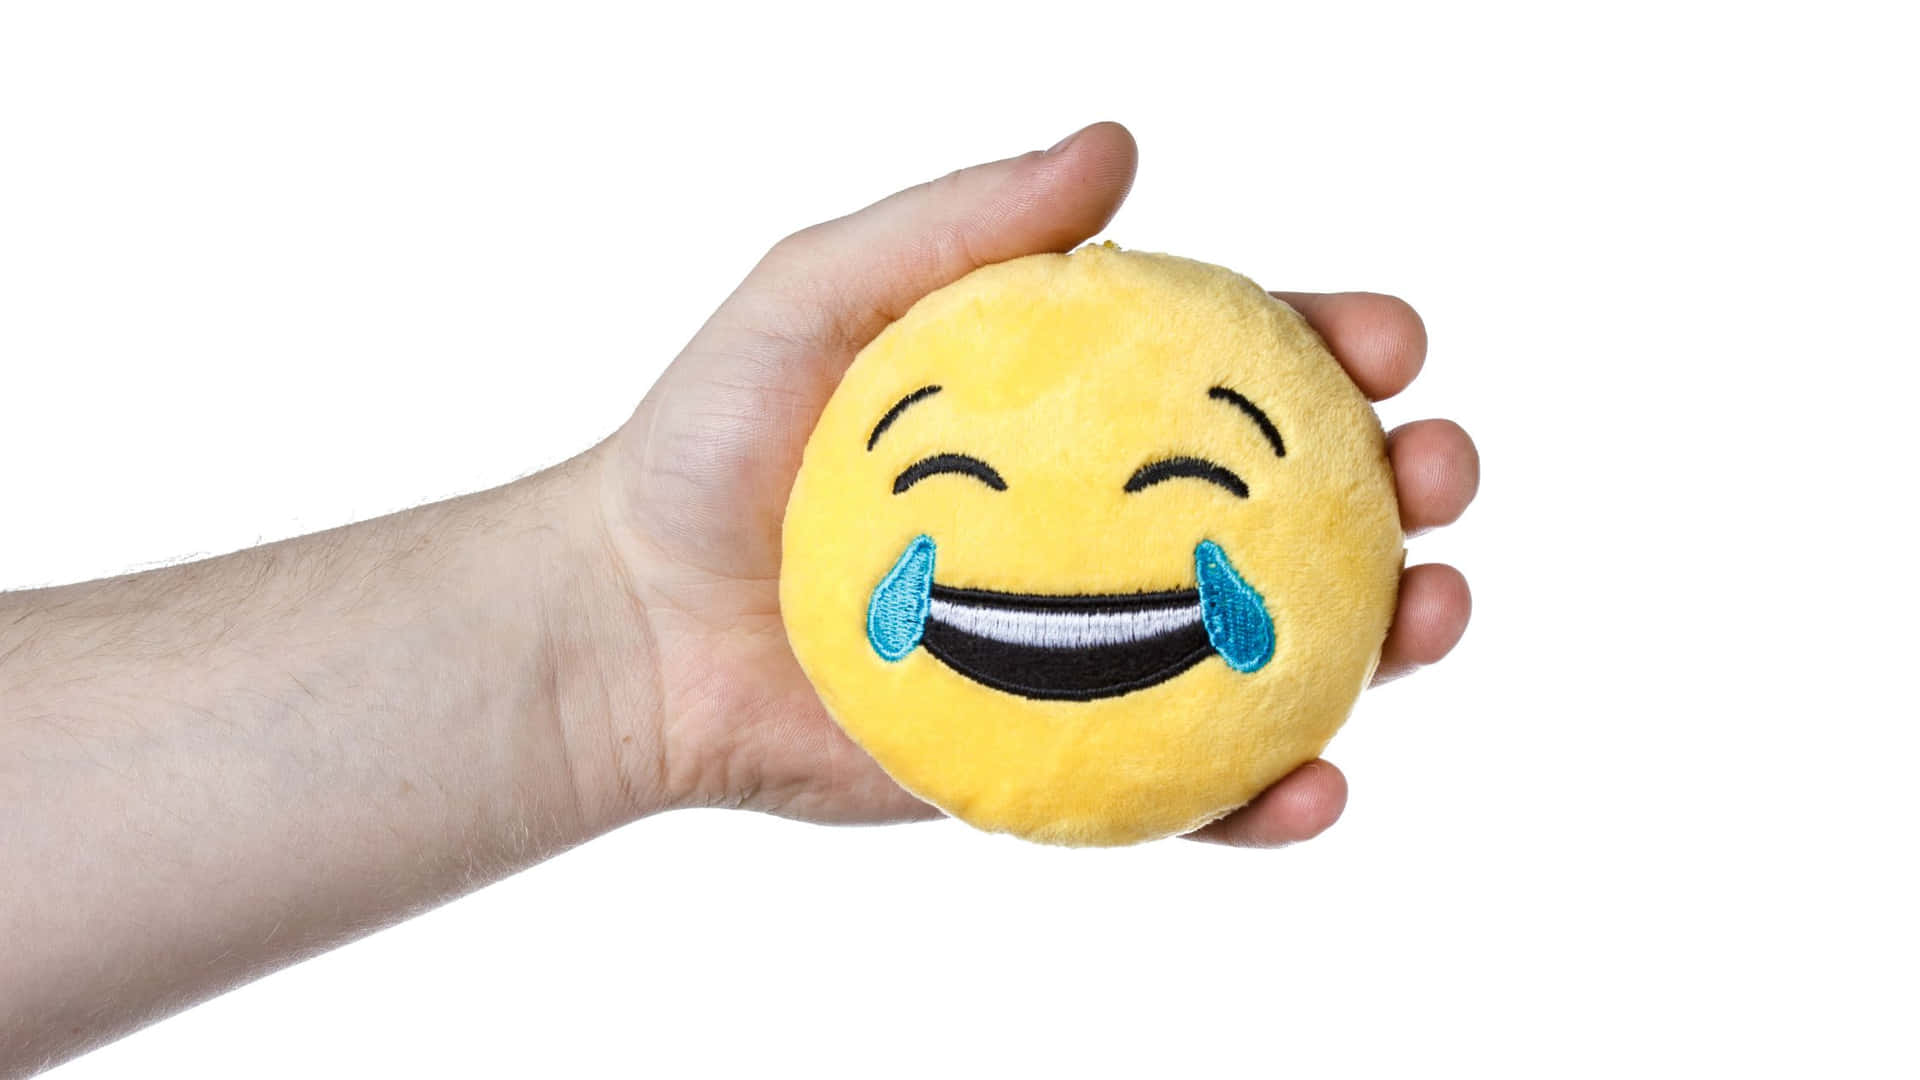 Yellow Ball With Happy Smile Wallpaper